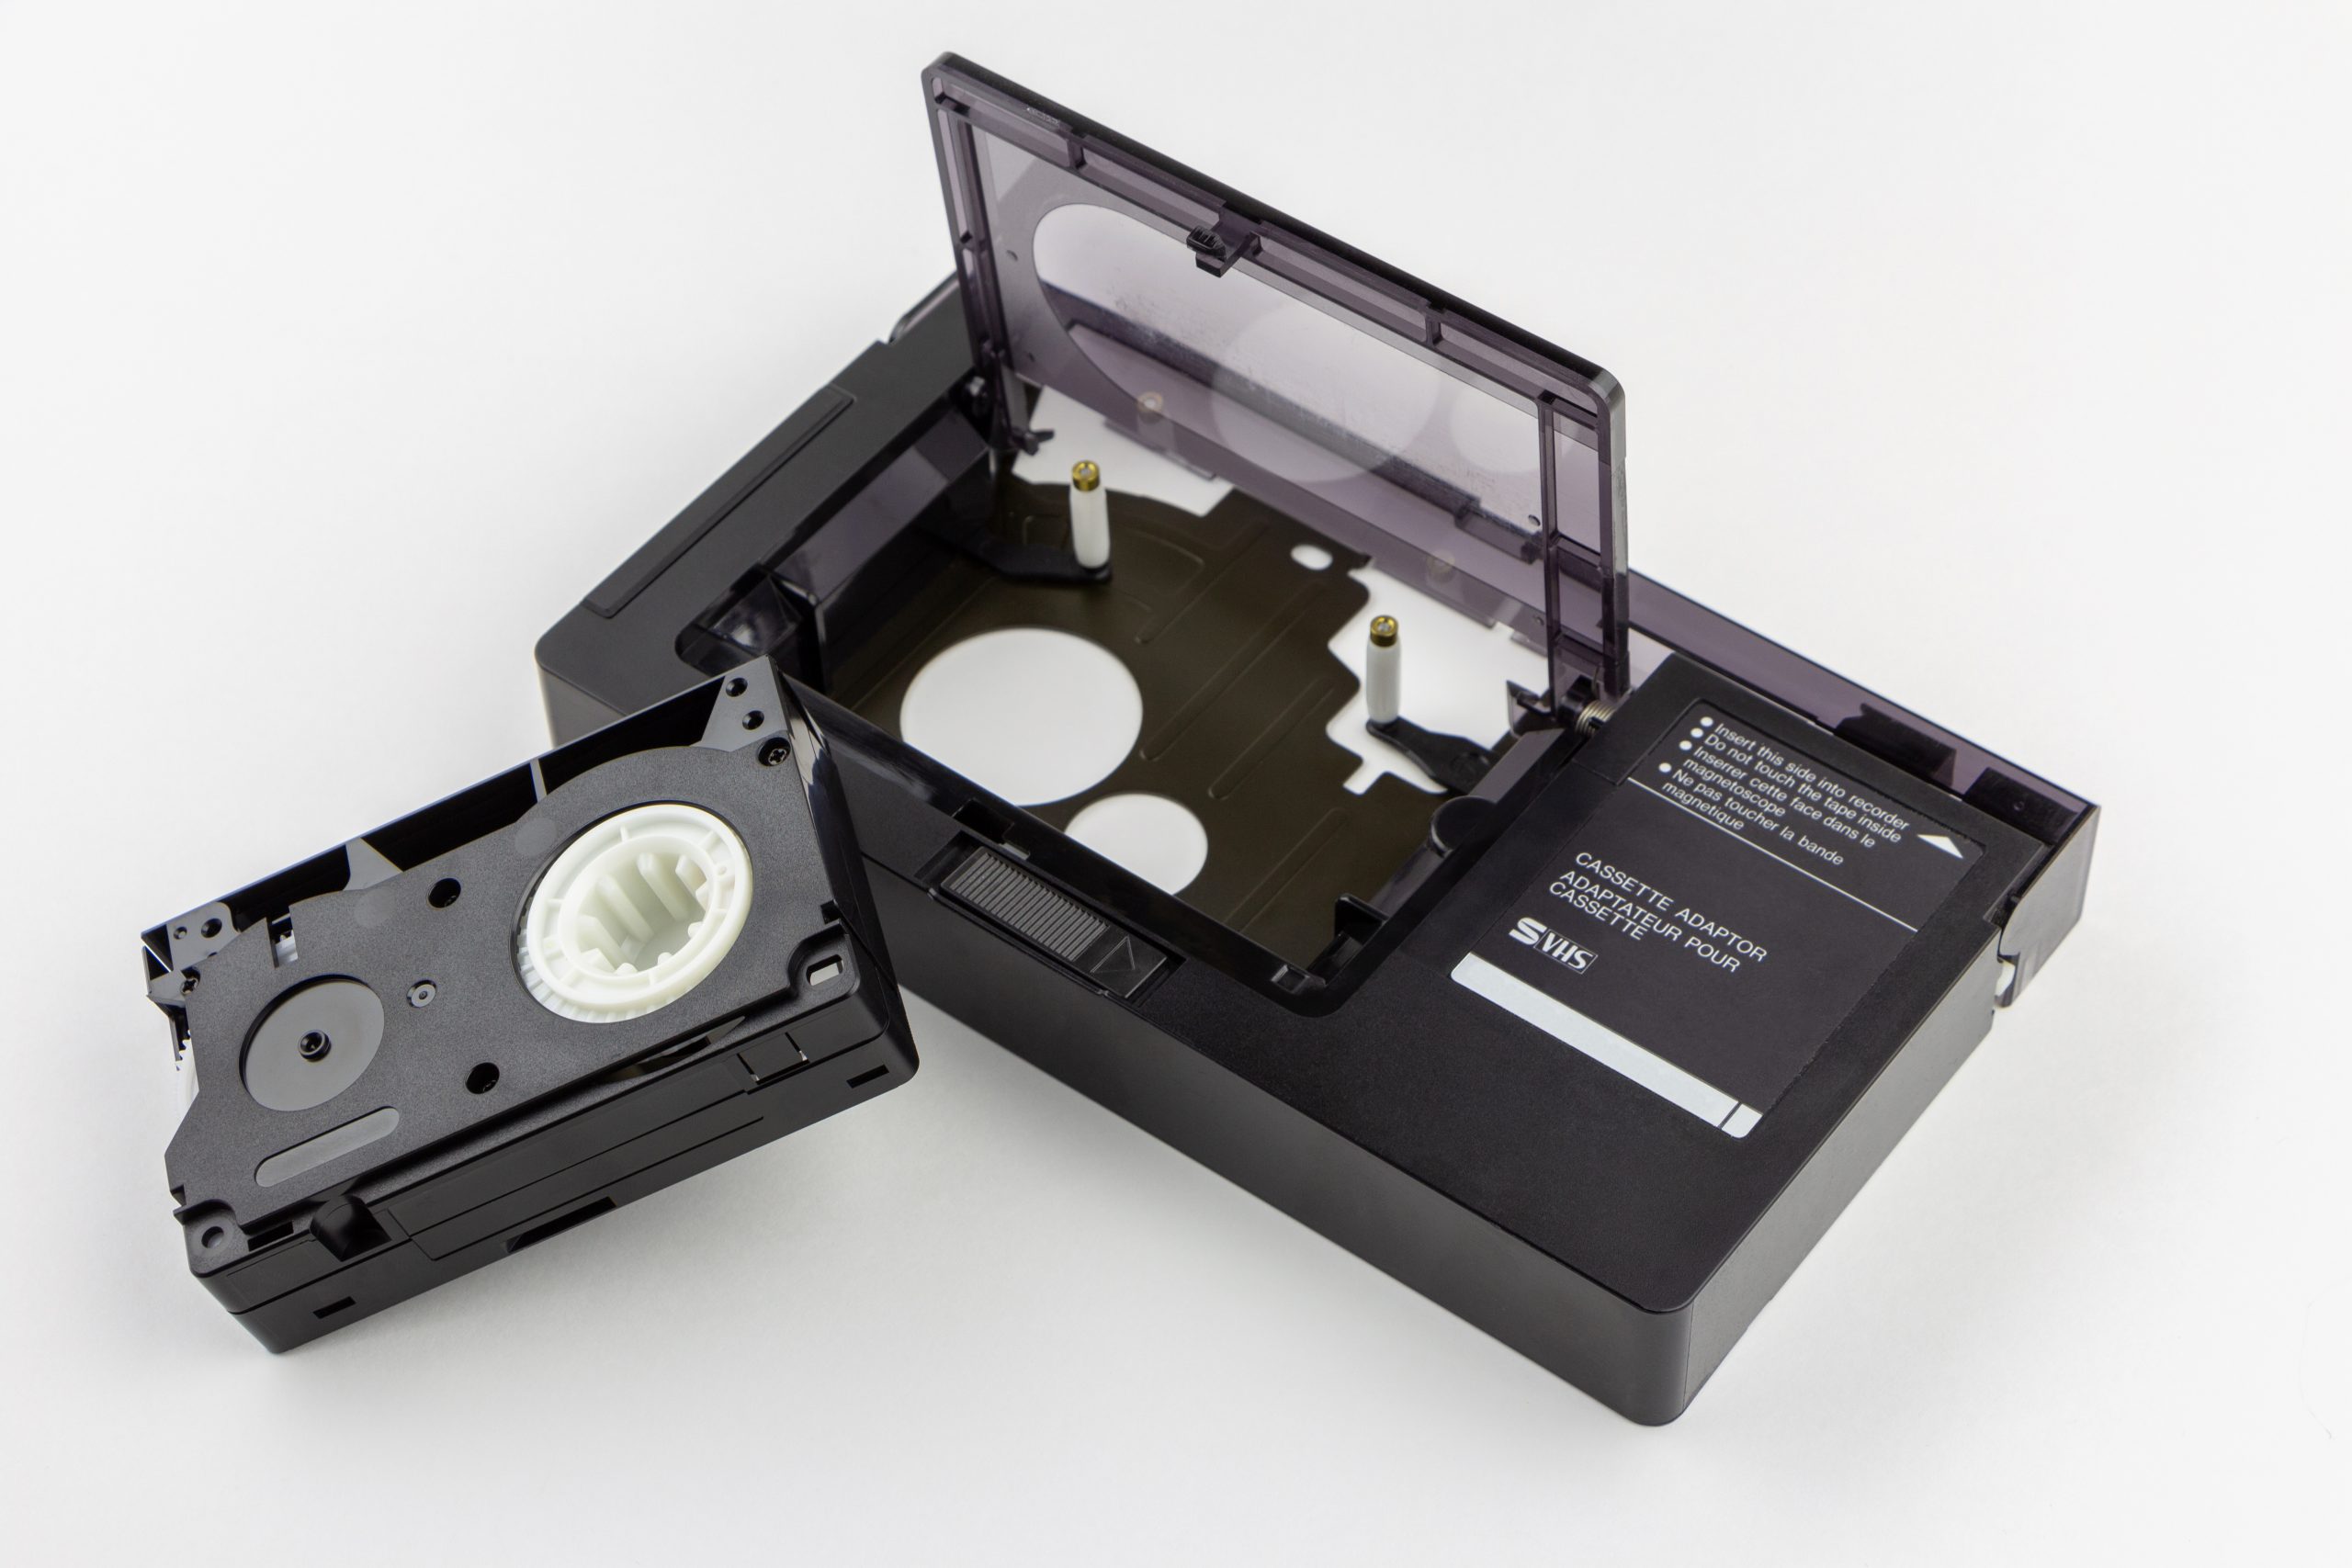 vhs tape adapter for vhs-c tapes